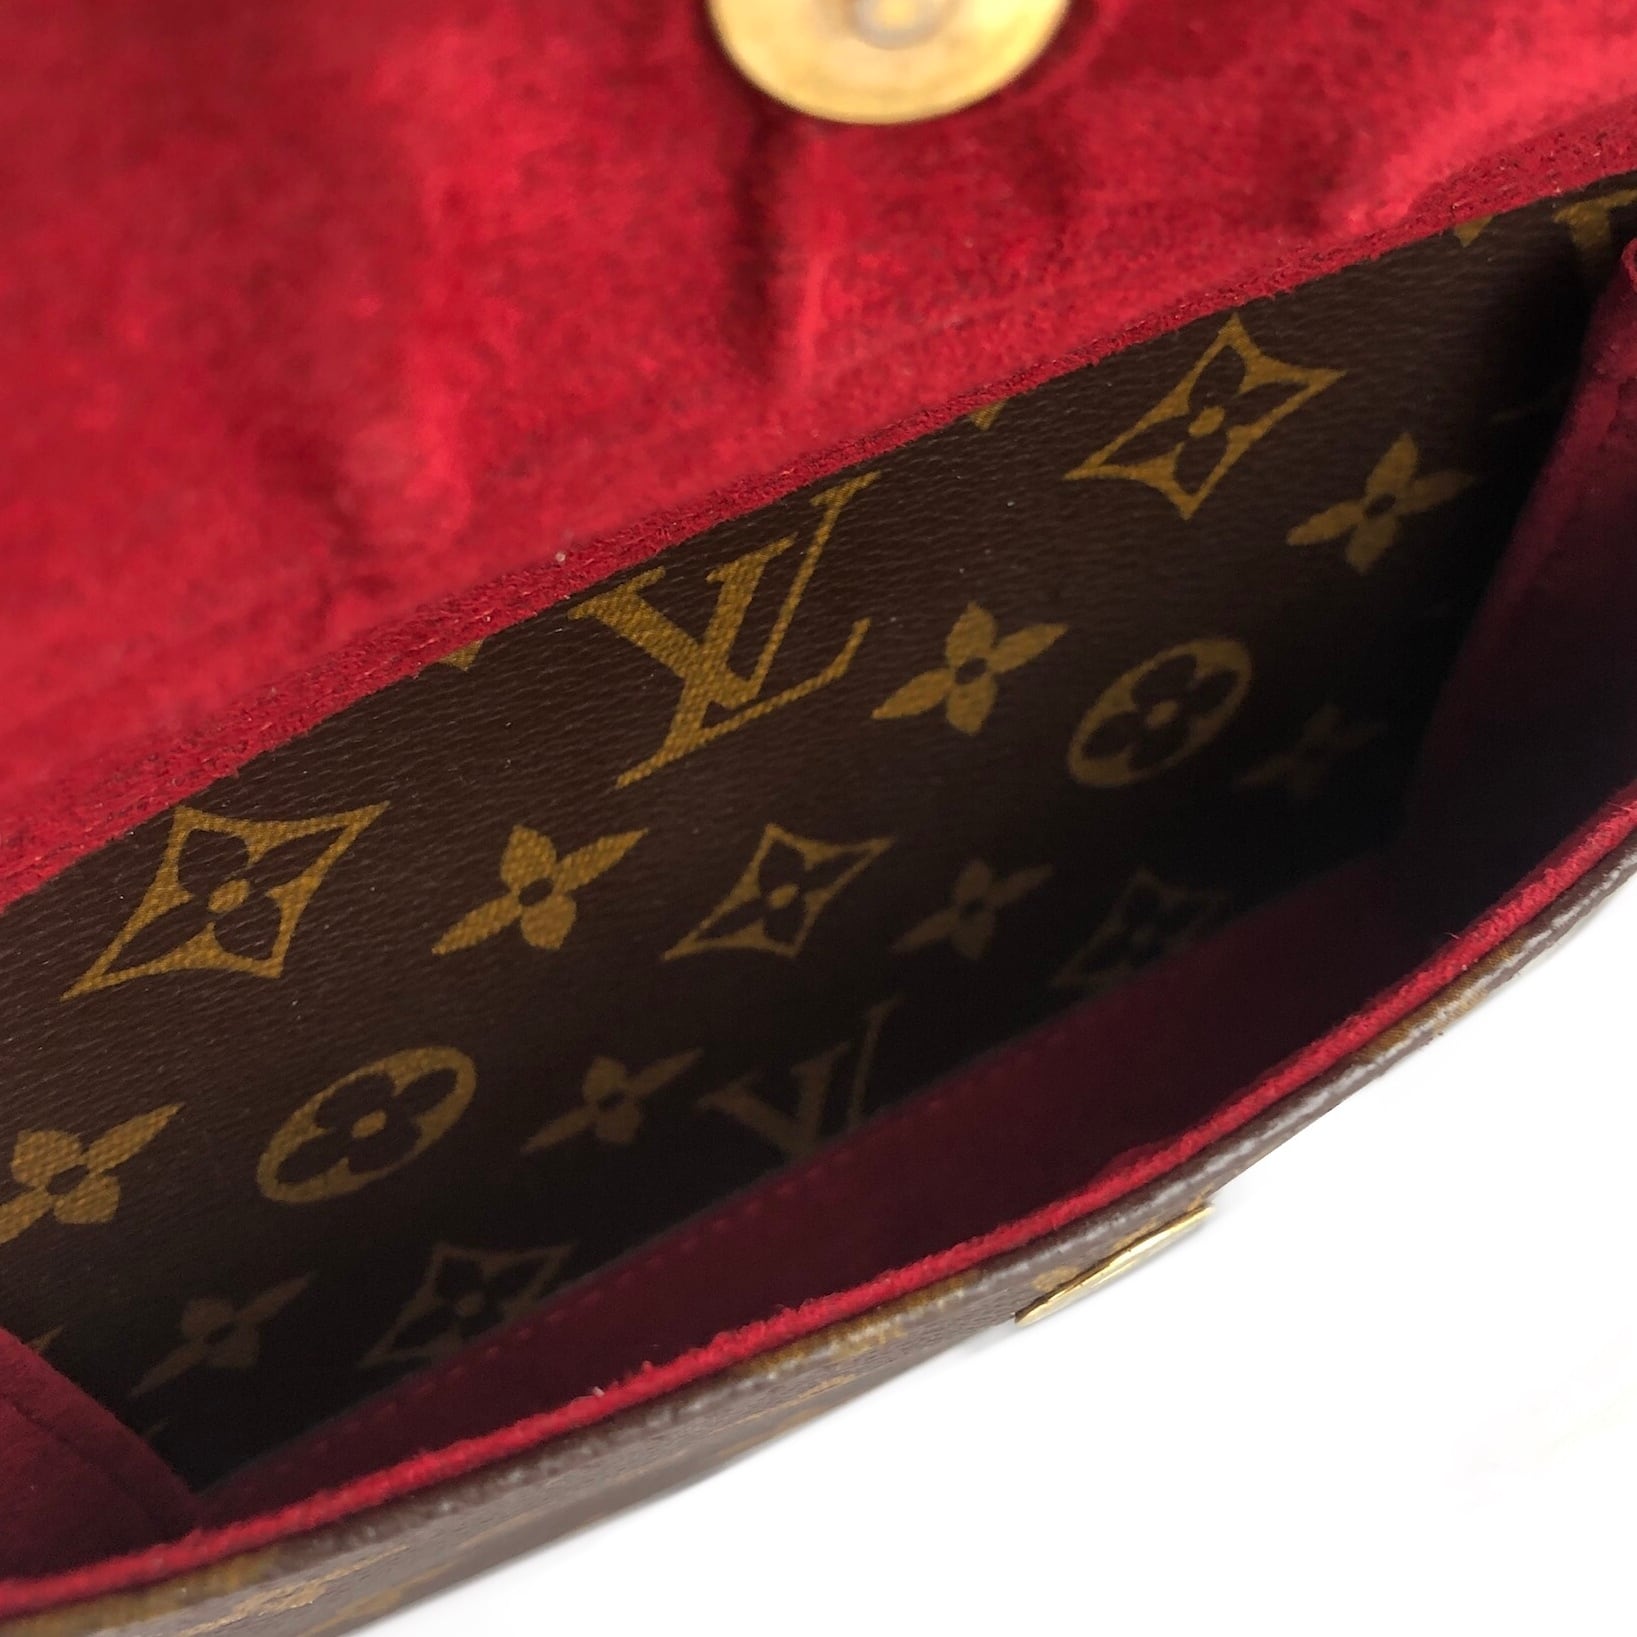 LOUIS VUITTON　ルイ ヴィトン　モノグラム　エクサントリシテ　M51161　ハンドバッグ　ブラウン　vintage　ヴィンテージ　オールド　 4z3iu7 | VintageShop solo powered by BASE